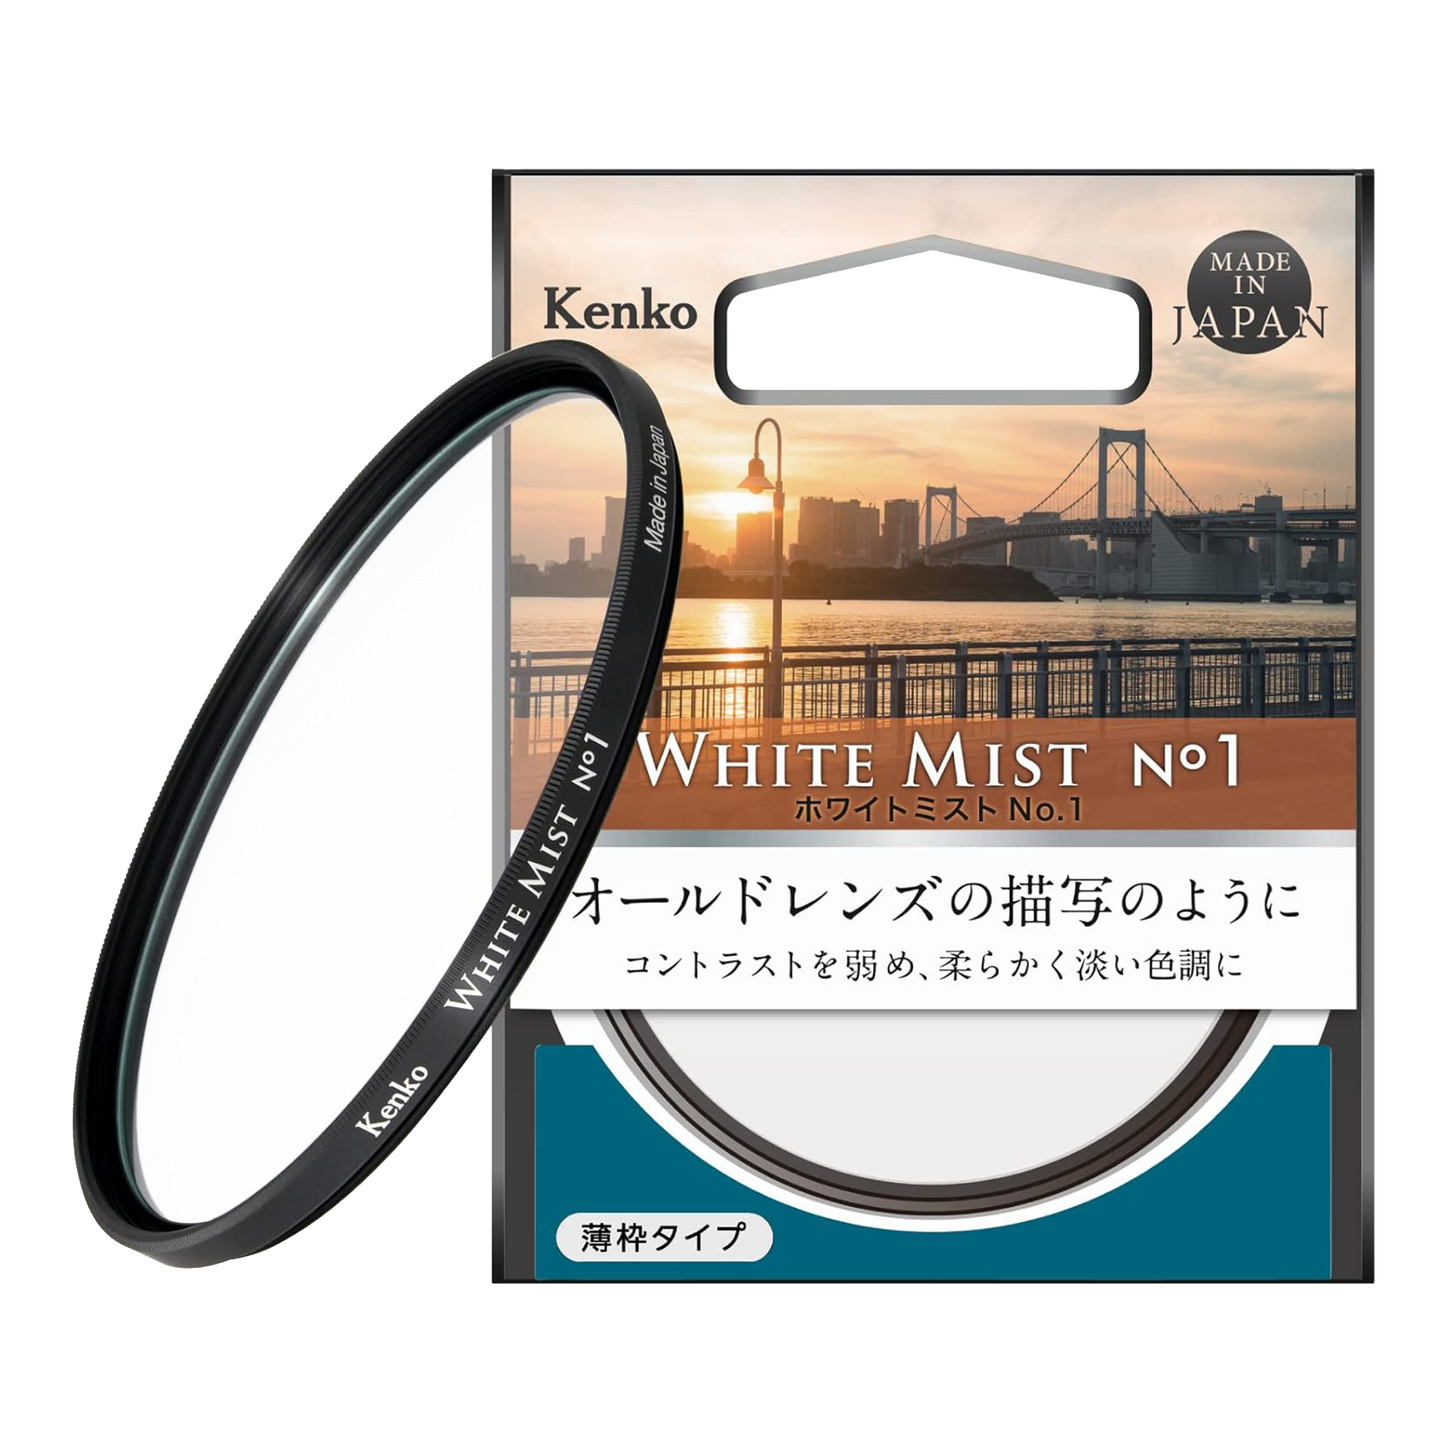 Kenko White Mist No.01, Soft effect filter "For a Vintage Touch"